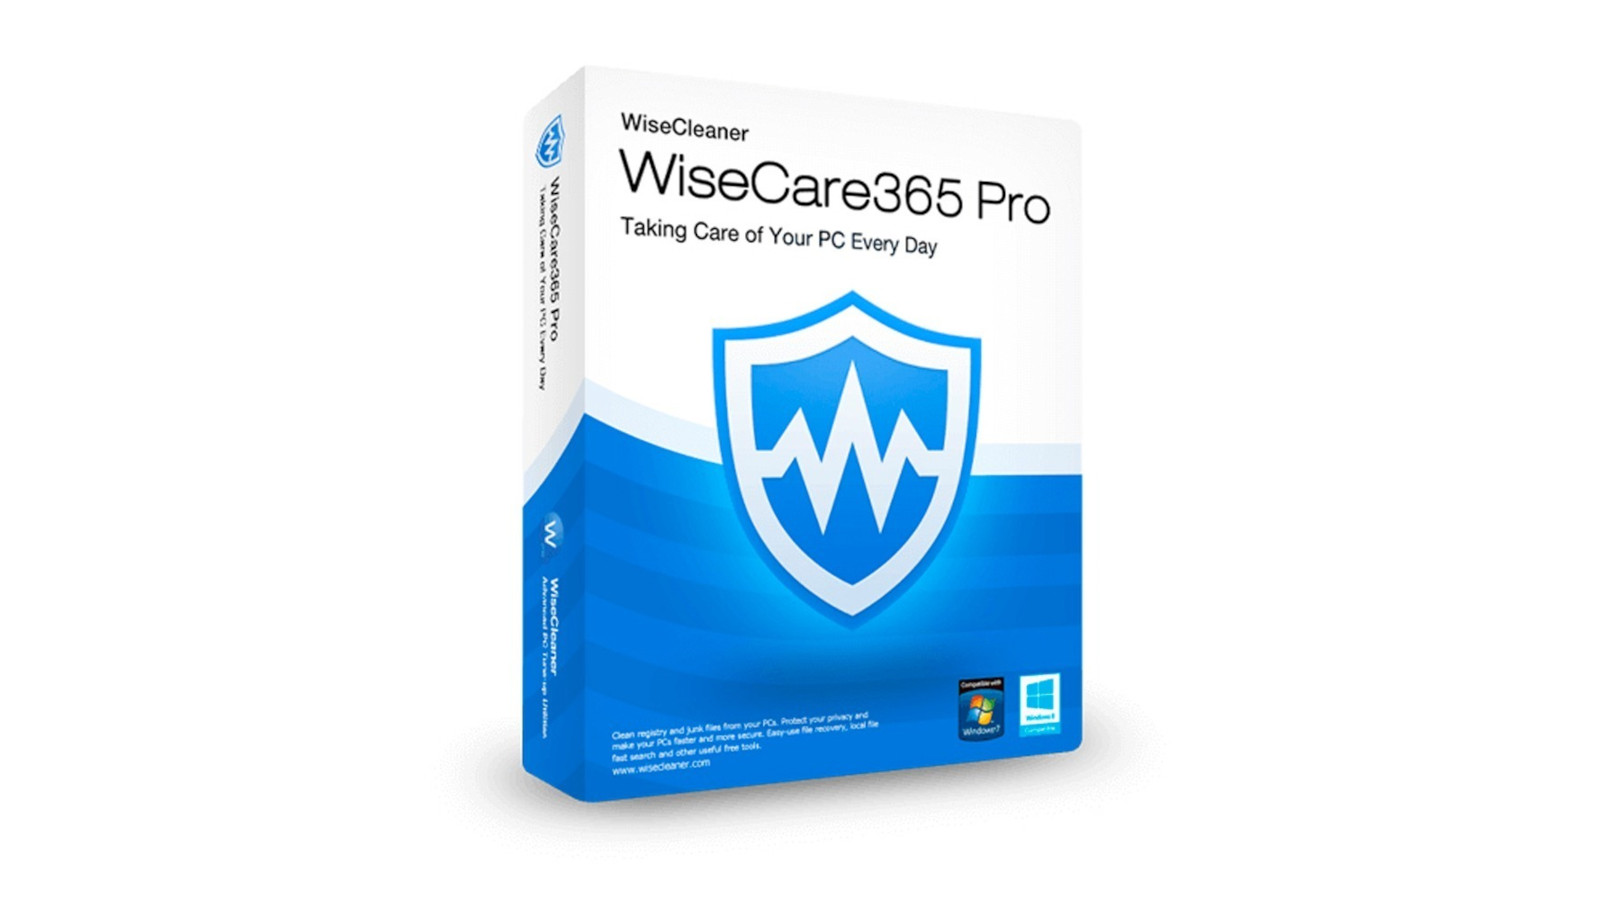 Wise Care 365 PRO CD Key (1 Year / 1 PC) 18.05 USD